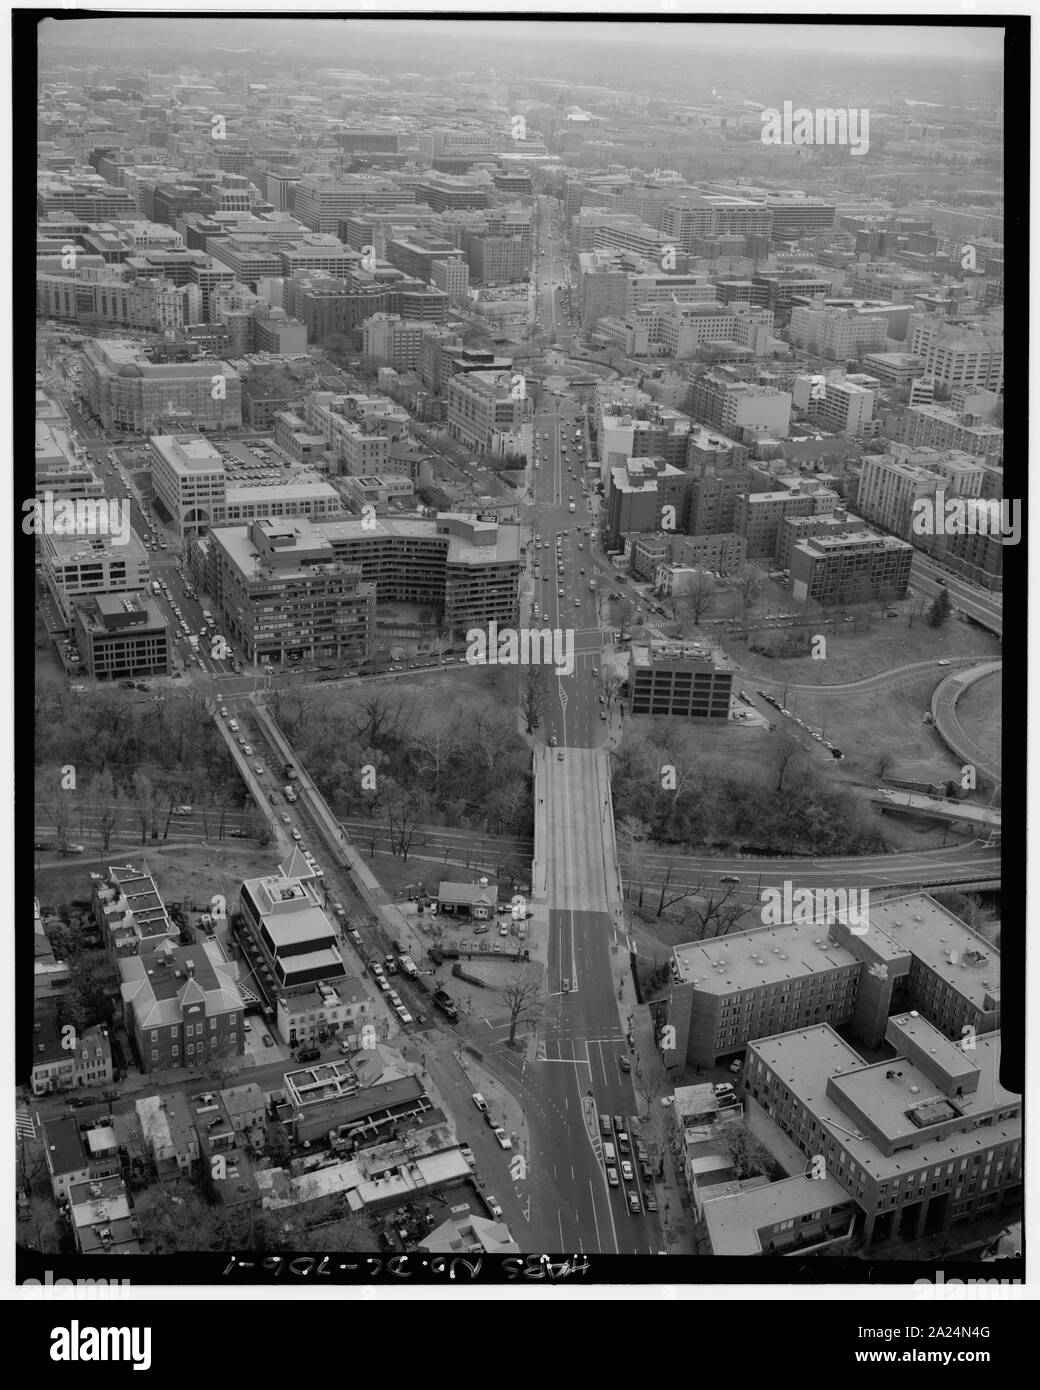 PENNSYLVANIA AVENUE CORRIDOR FROM 30TH STREET IN GEORGETOWN.; 1. AERIAL VIEW SOUTHEAST ALONG THE PENNSYLVANIA AVENUE CORRIDOR FROM 30TH STREET IN GEORGETOWN. - Pennsylvania Avenue, Washington, District of Columbia, DC; Stock Photo